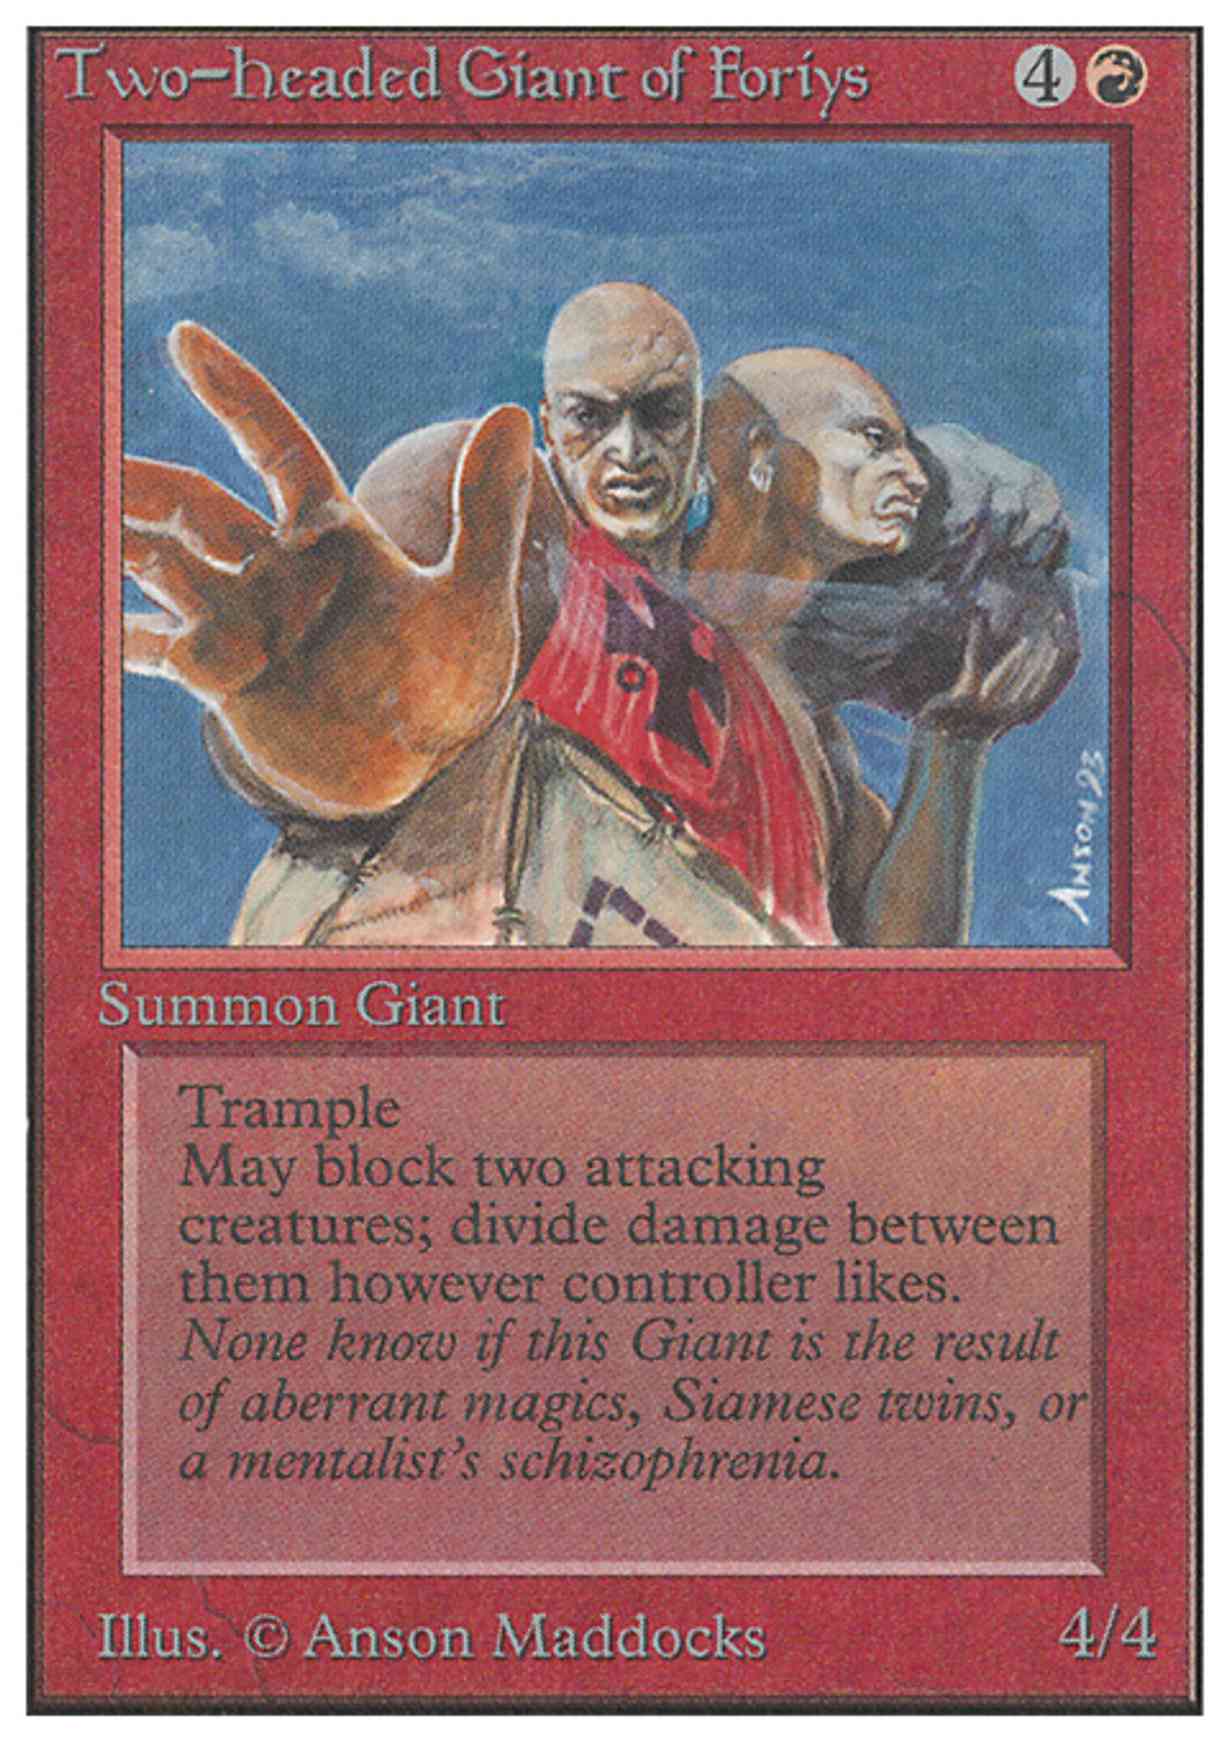 Two-Headed Giant of Foriys magic card front